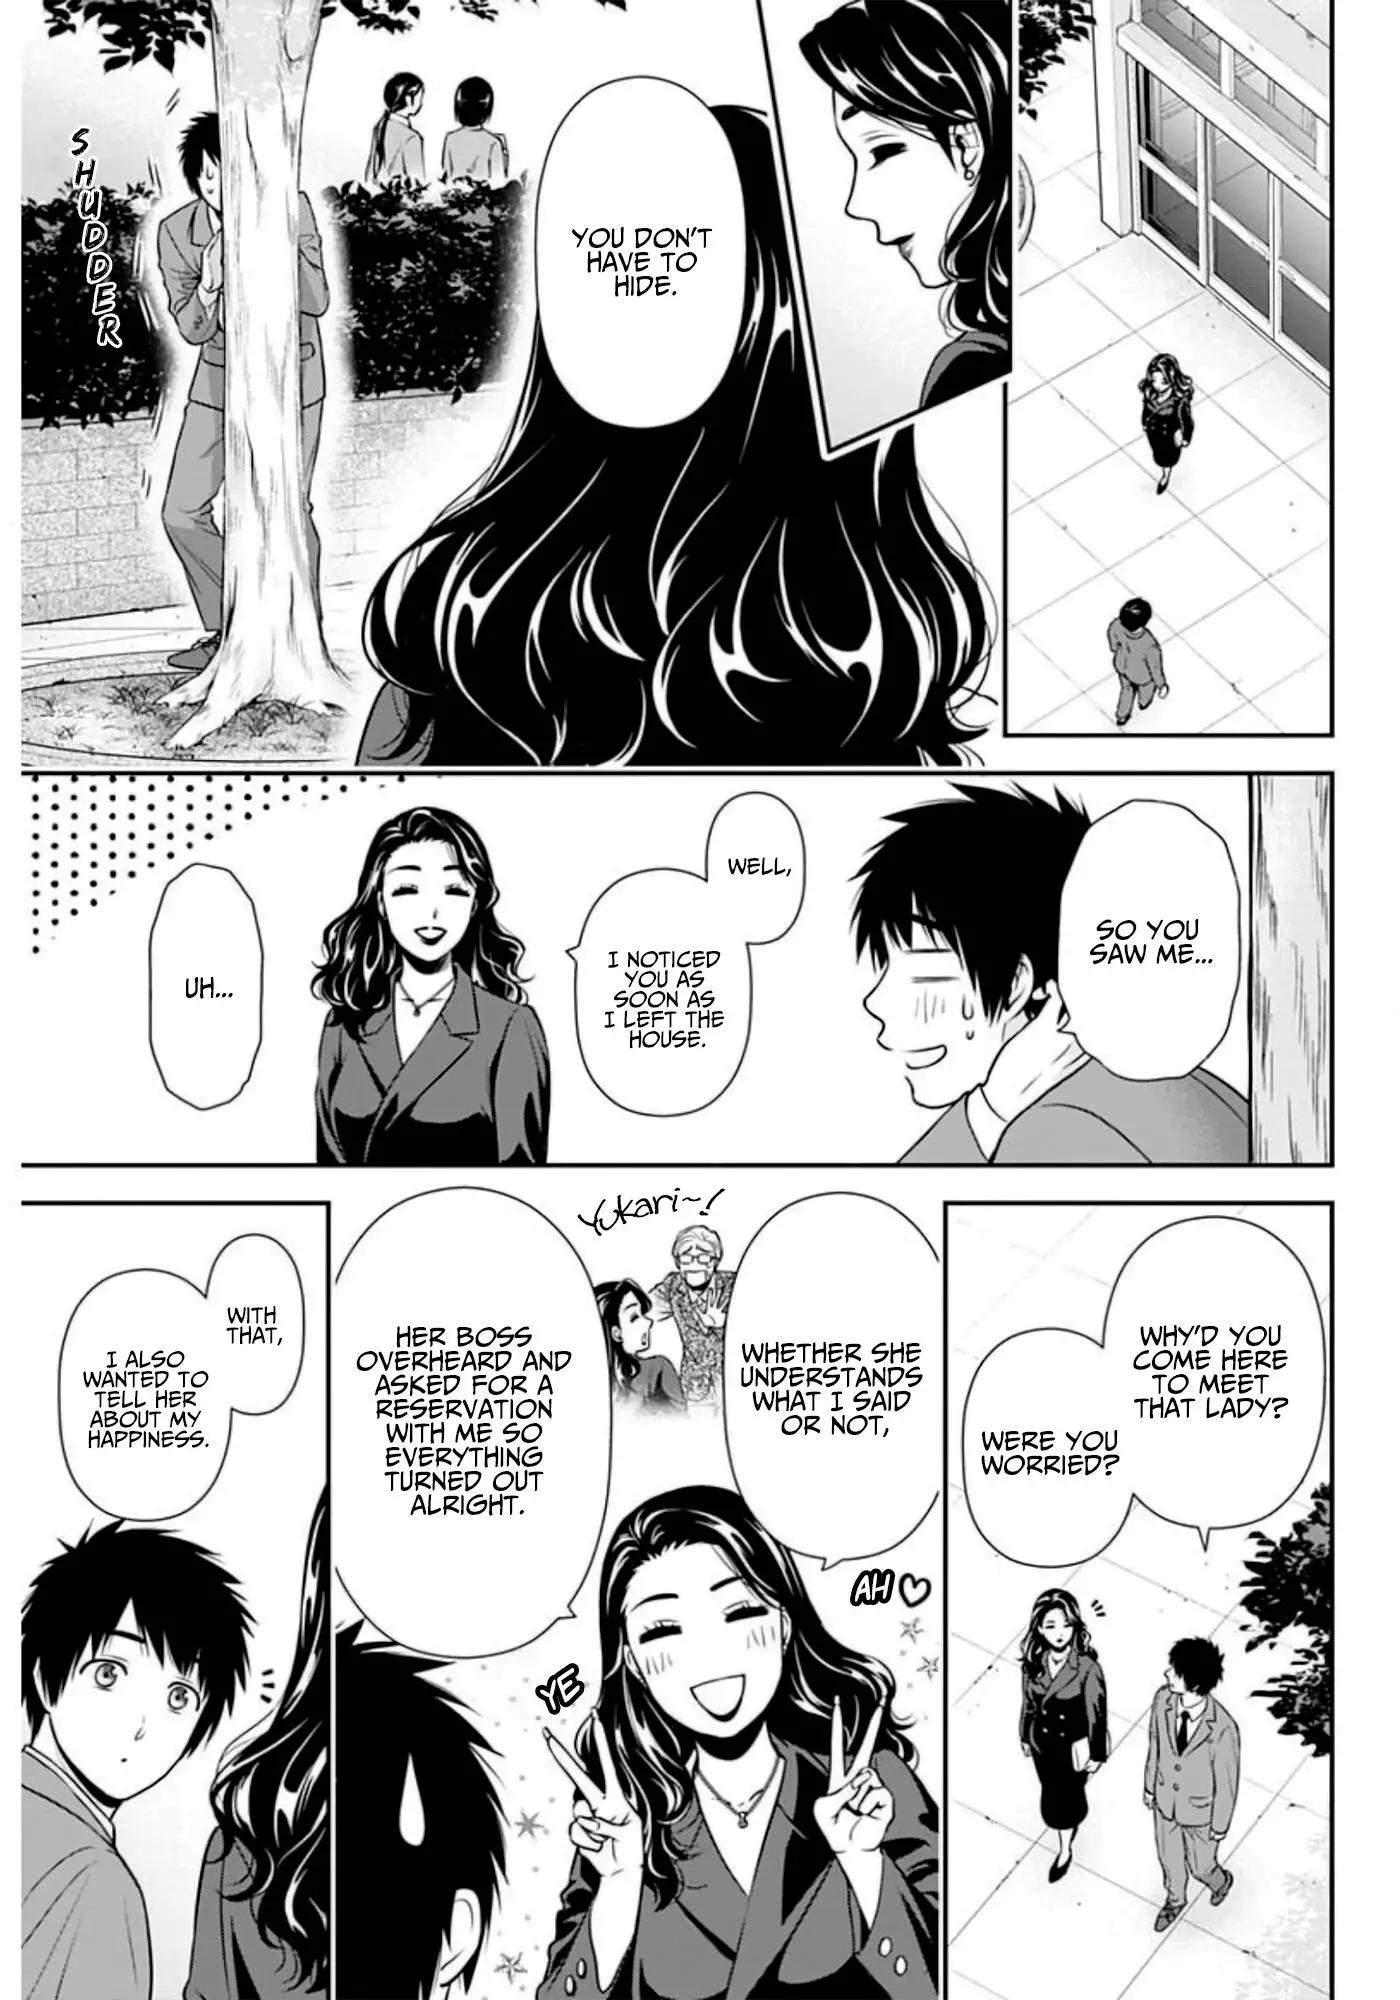 Can I Live With You? - 6 page 12-02aae843